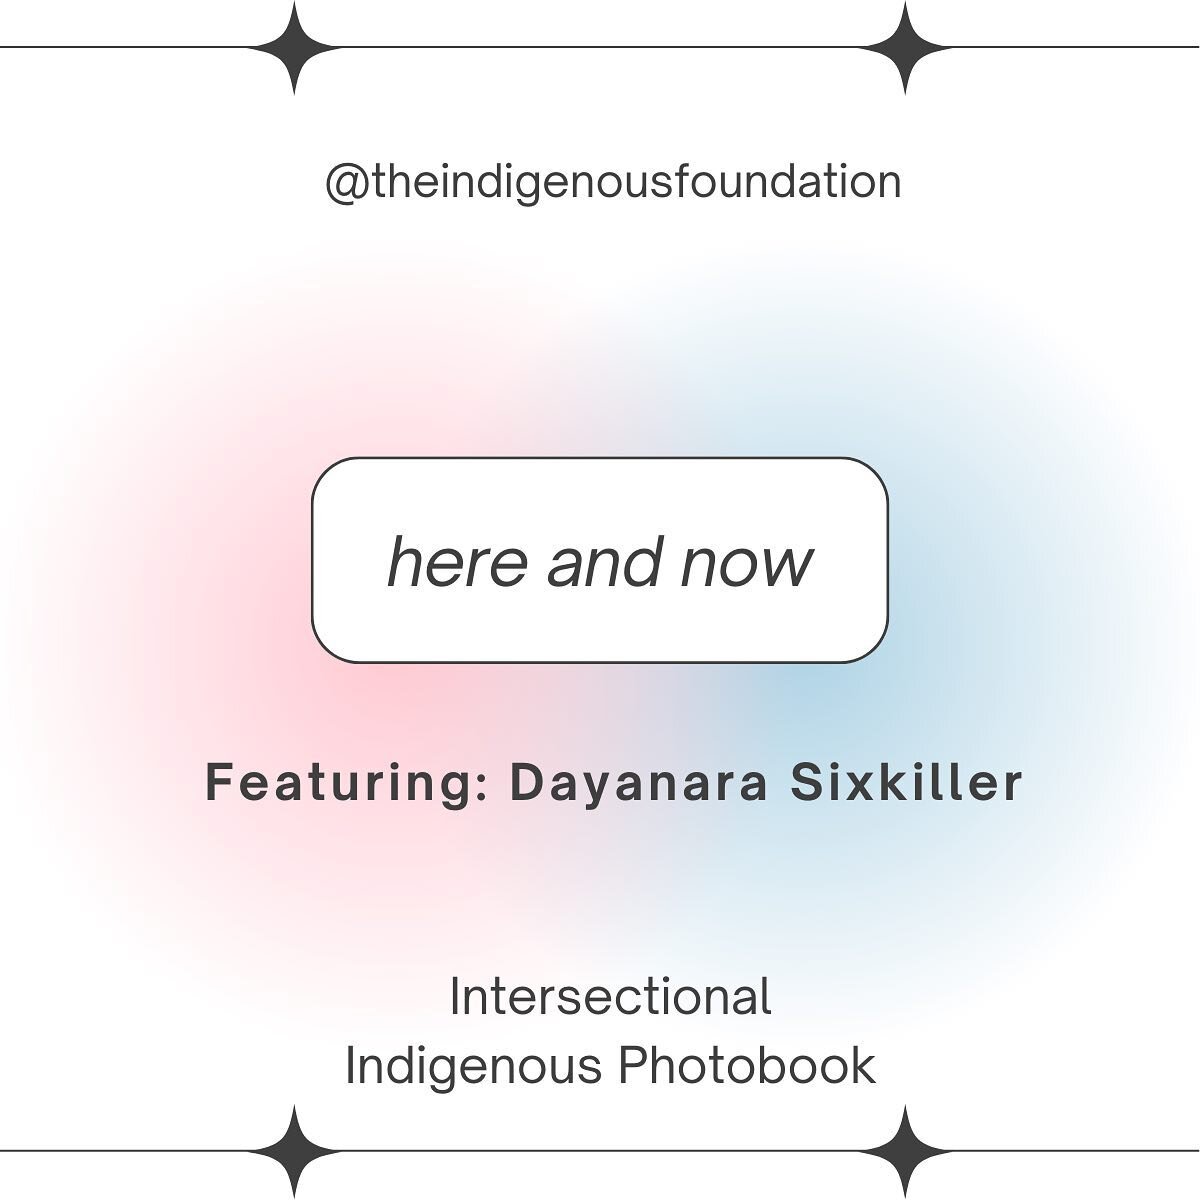 We are so excited to share our third submission as part of our very first photobook project, featuring Dayanara Sixkiller (@mesquite_media)! 

If you would like to be part of our next round of Photobook submissions in November, you can visit our Phot